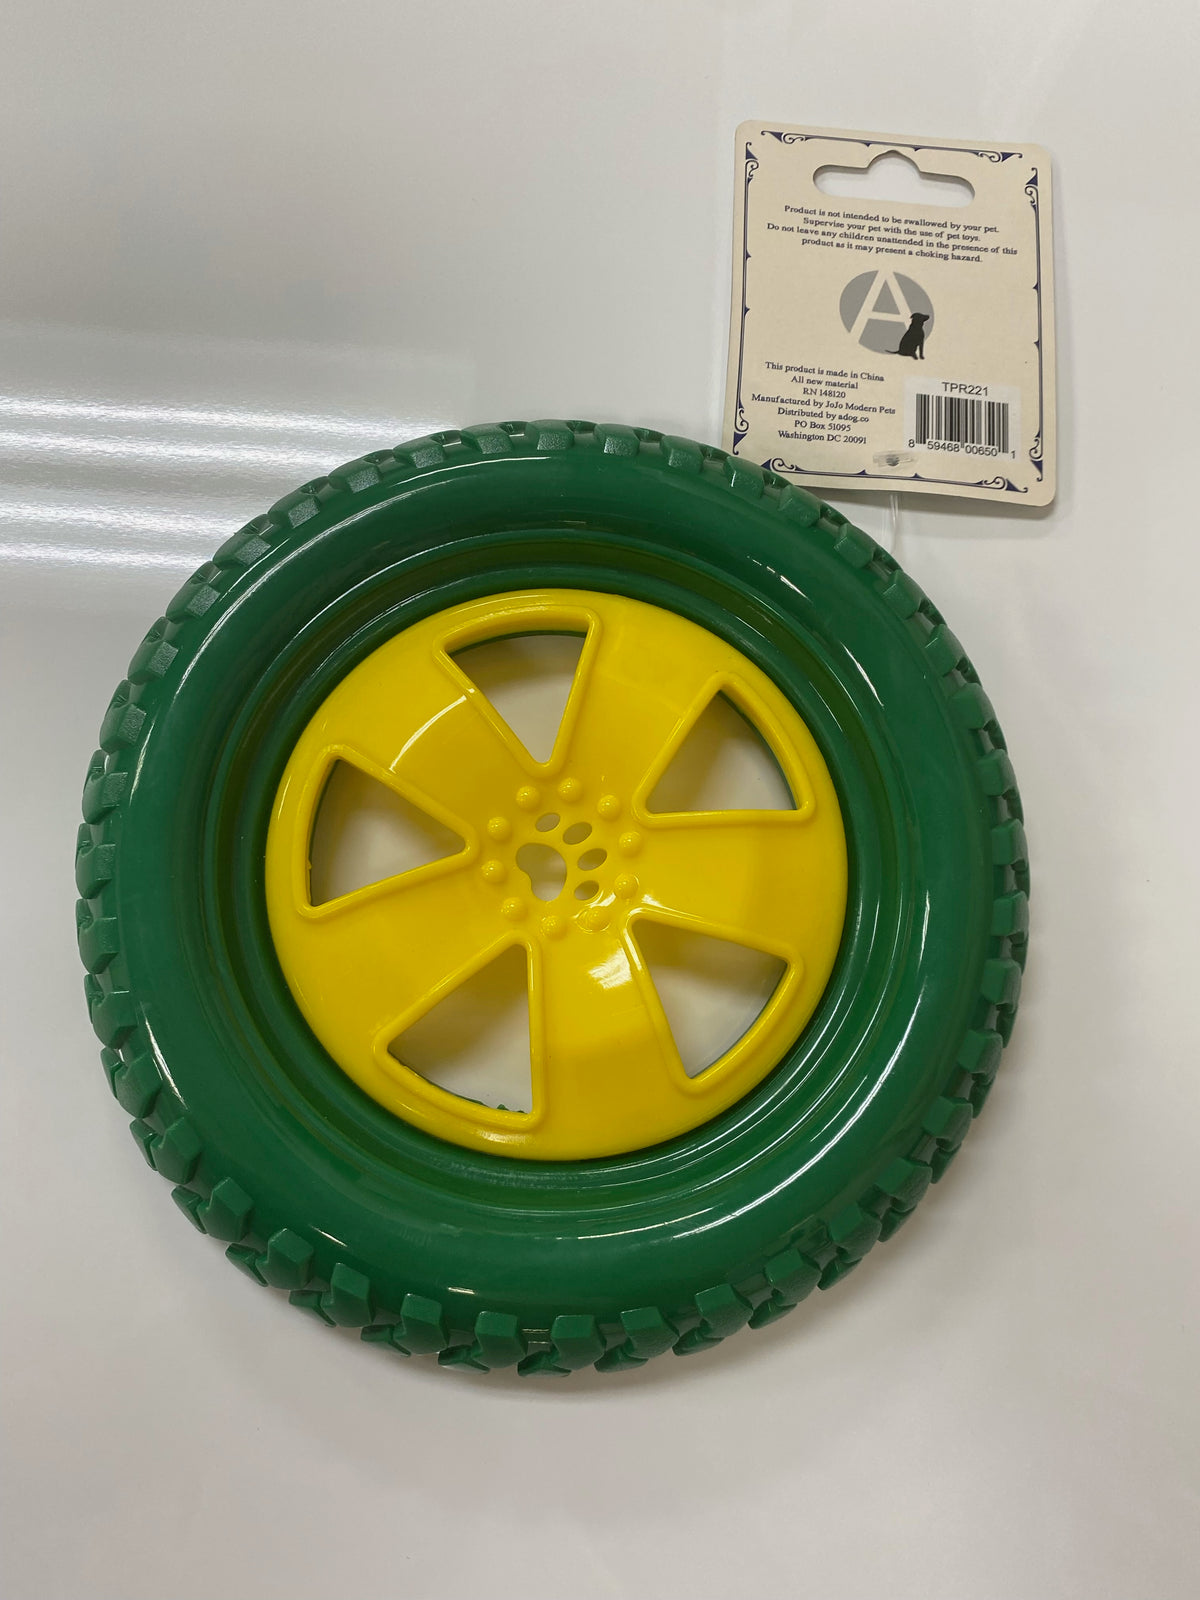 Tractor Tire Frisbee Dog Toy